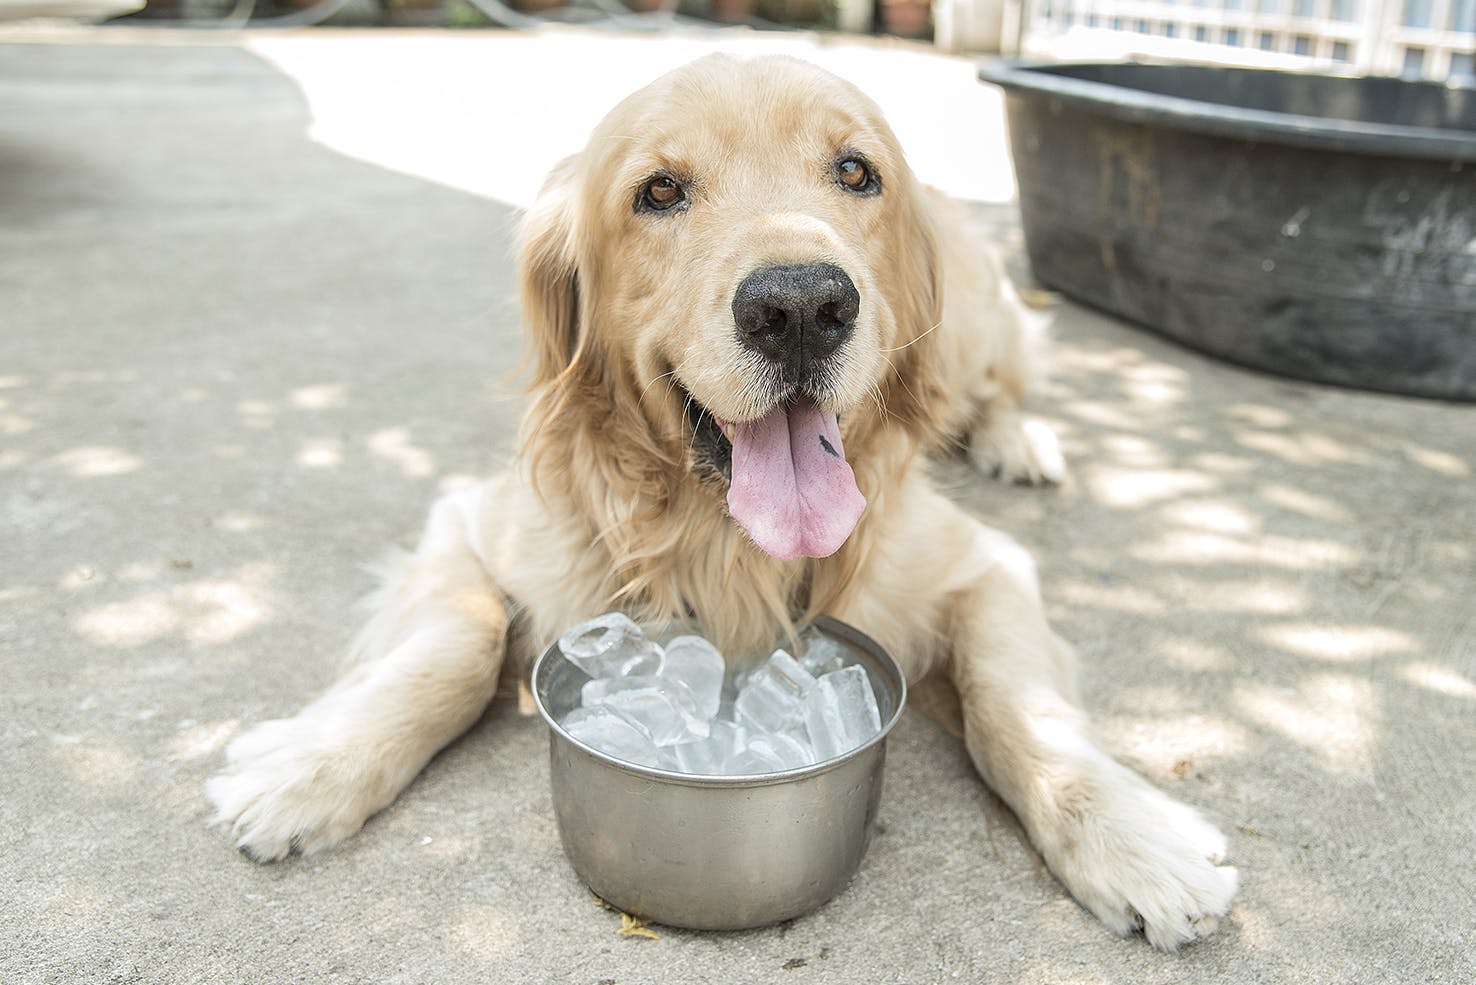 daily-wag-wag-provides-safety-tips-to-help-pet-parents-protect-their-dogs-from-the-dangers-of-hot-temperatures-hero-image